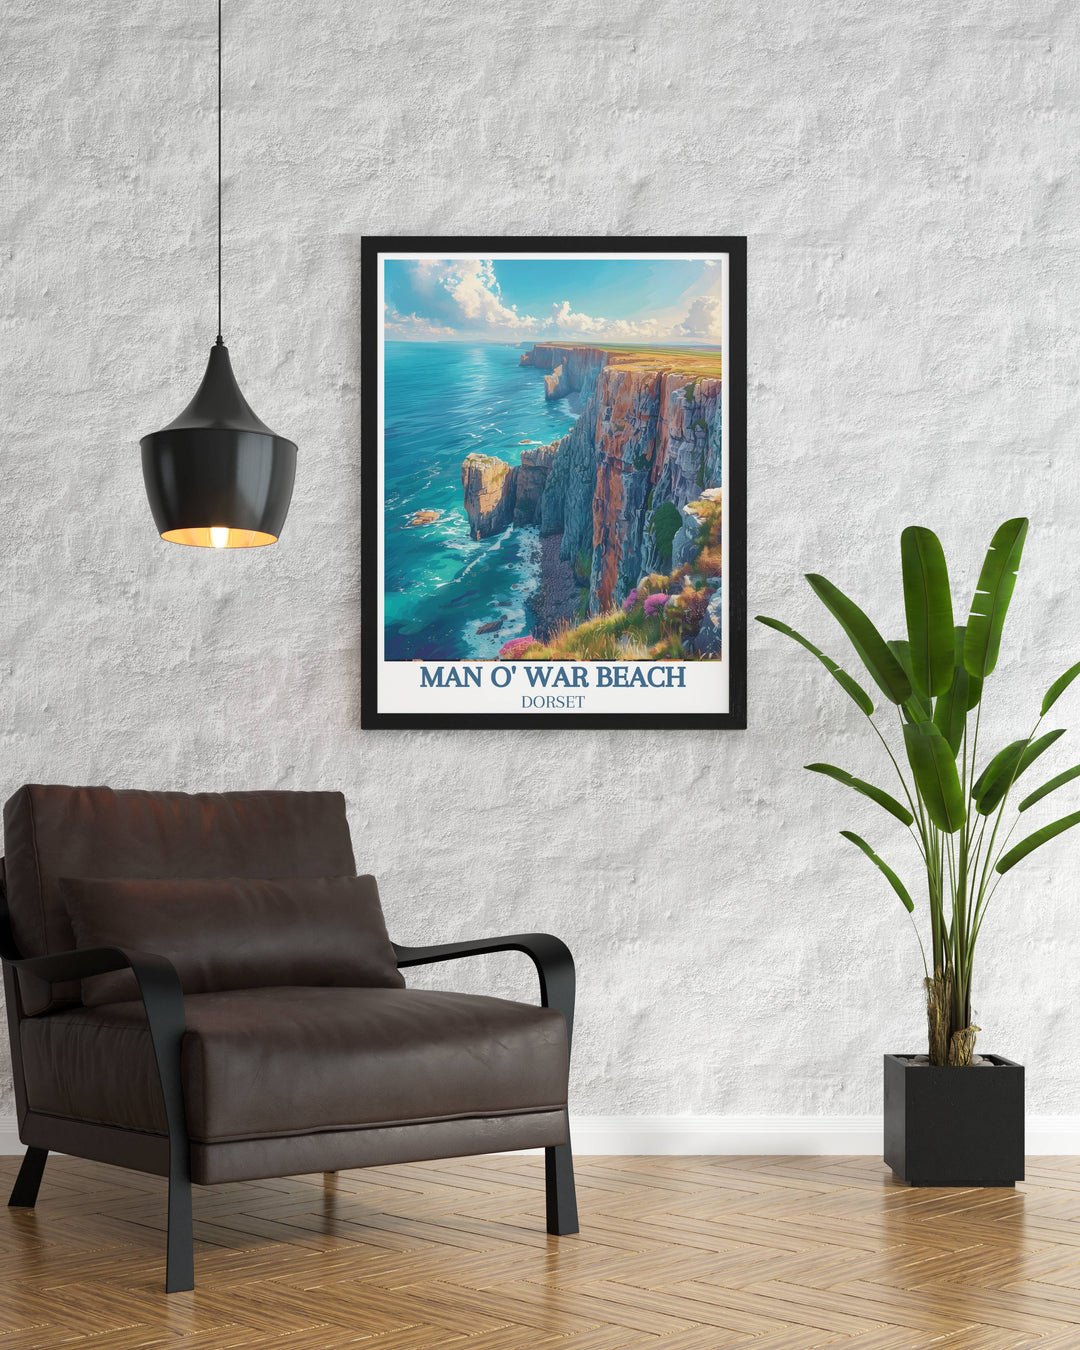 Durdle Door Arch and Jurassic Park Cliffs vintage travel print highlighting the beauty of the Jurassic Coast in Dorset perfect for wall art and home decor bringing the stunning scenery of these iconic landmarks into your home ideal for gifts and collectors.